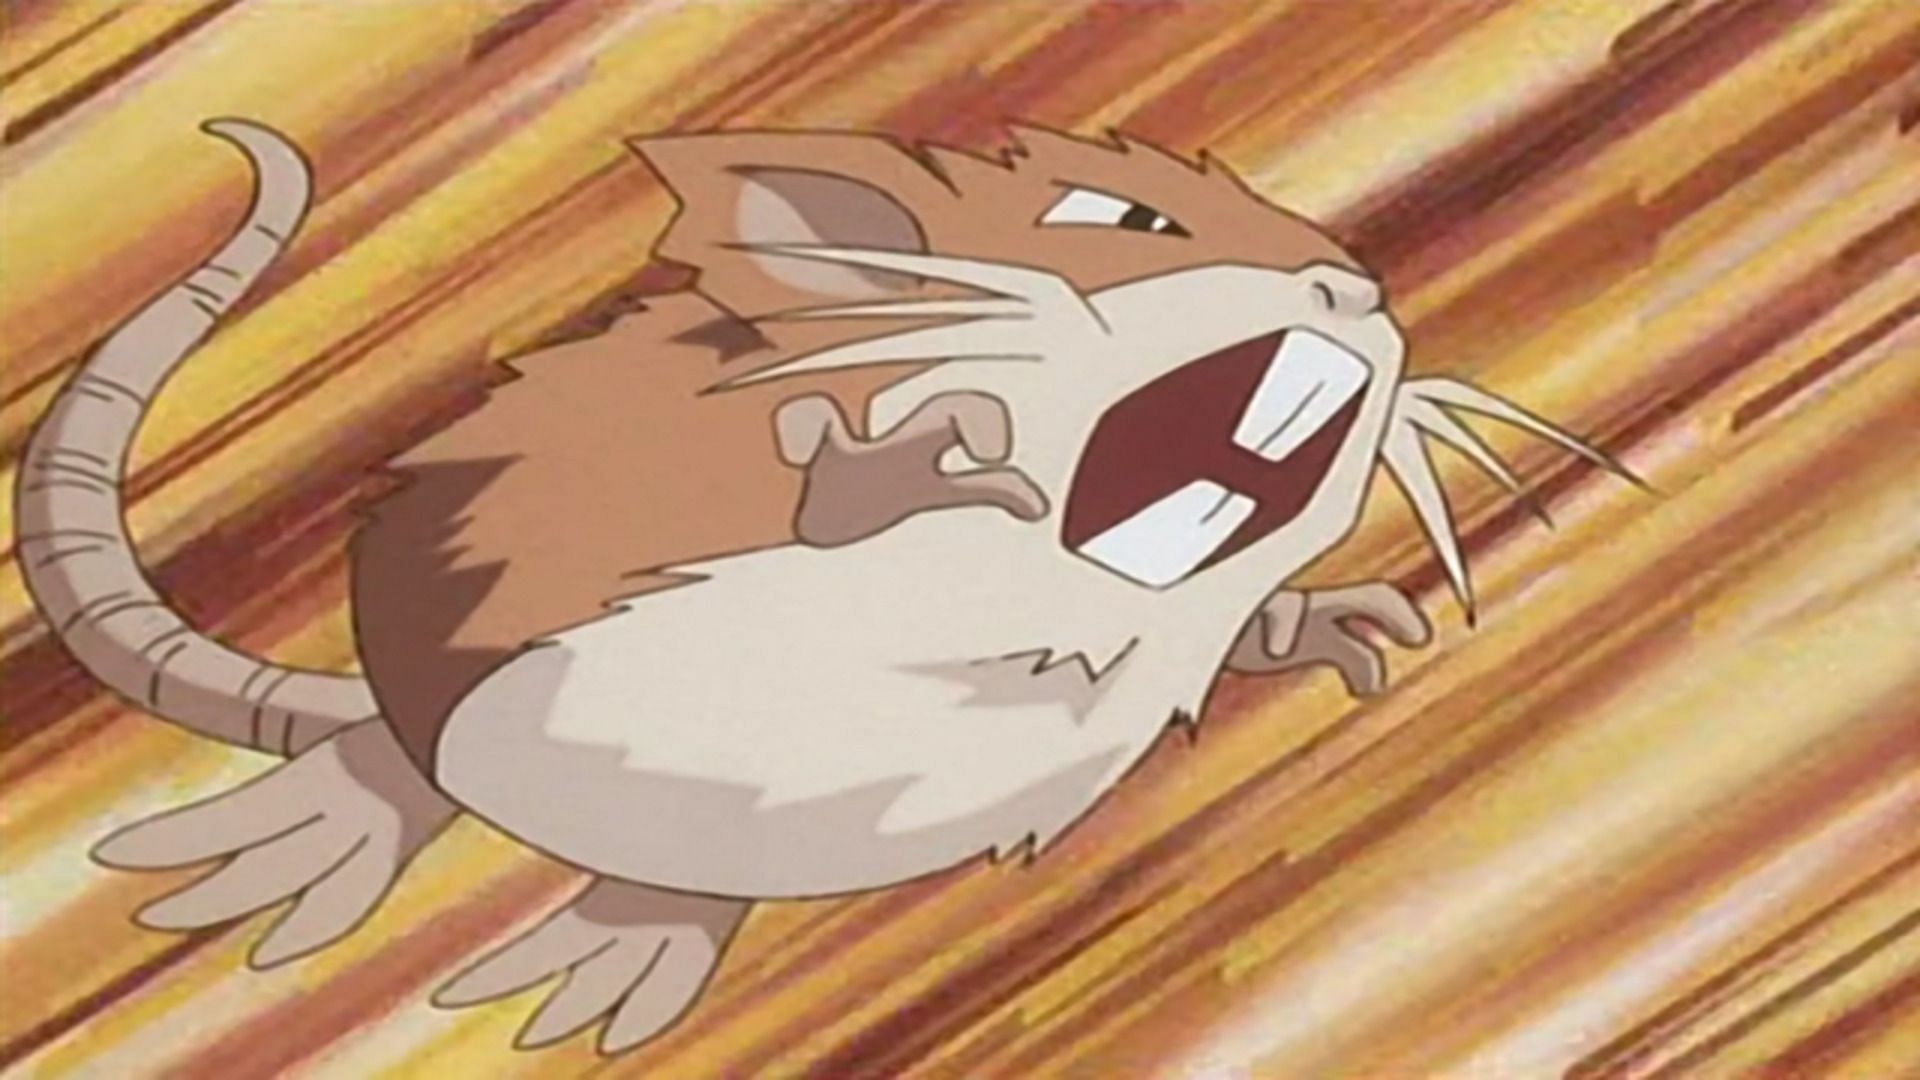 Raticate as seen in the anime (Image via The Pokemon Company)